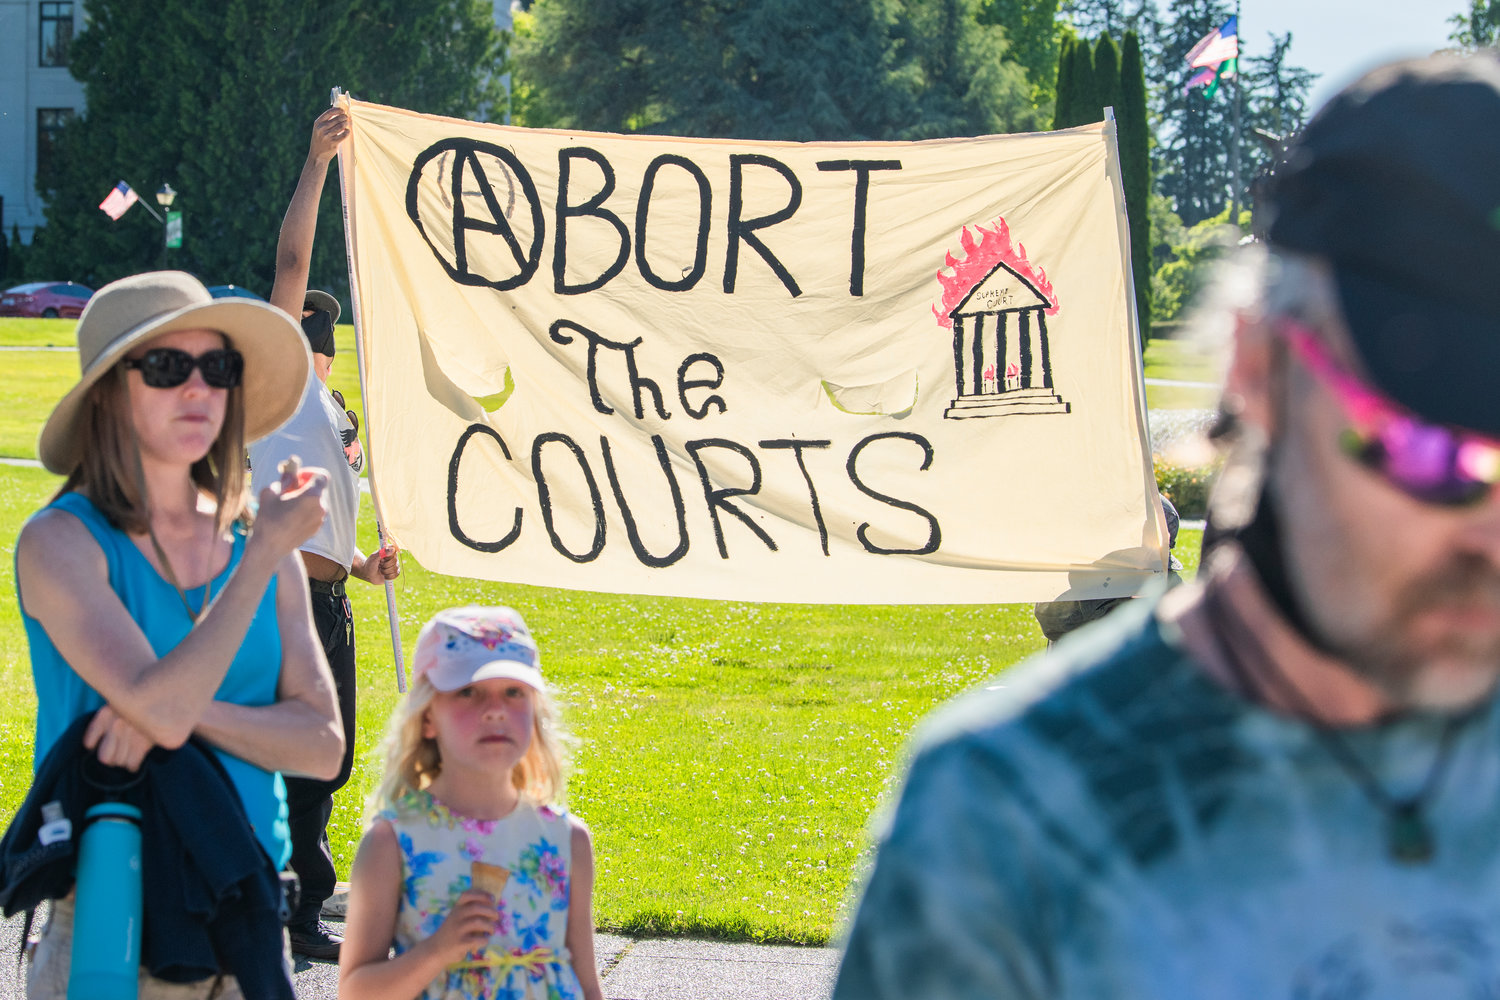 A sign reads“Abort the courts” during a protest Friday afternoon in Olympia.